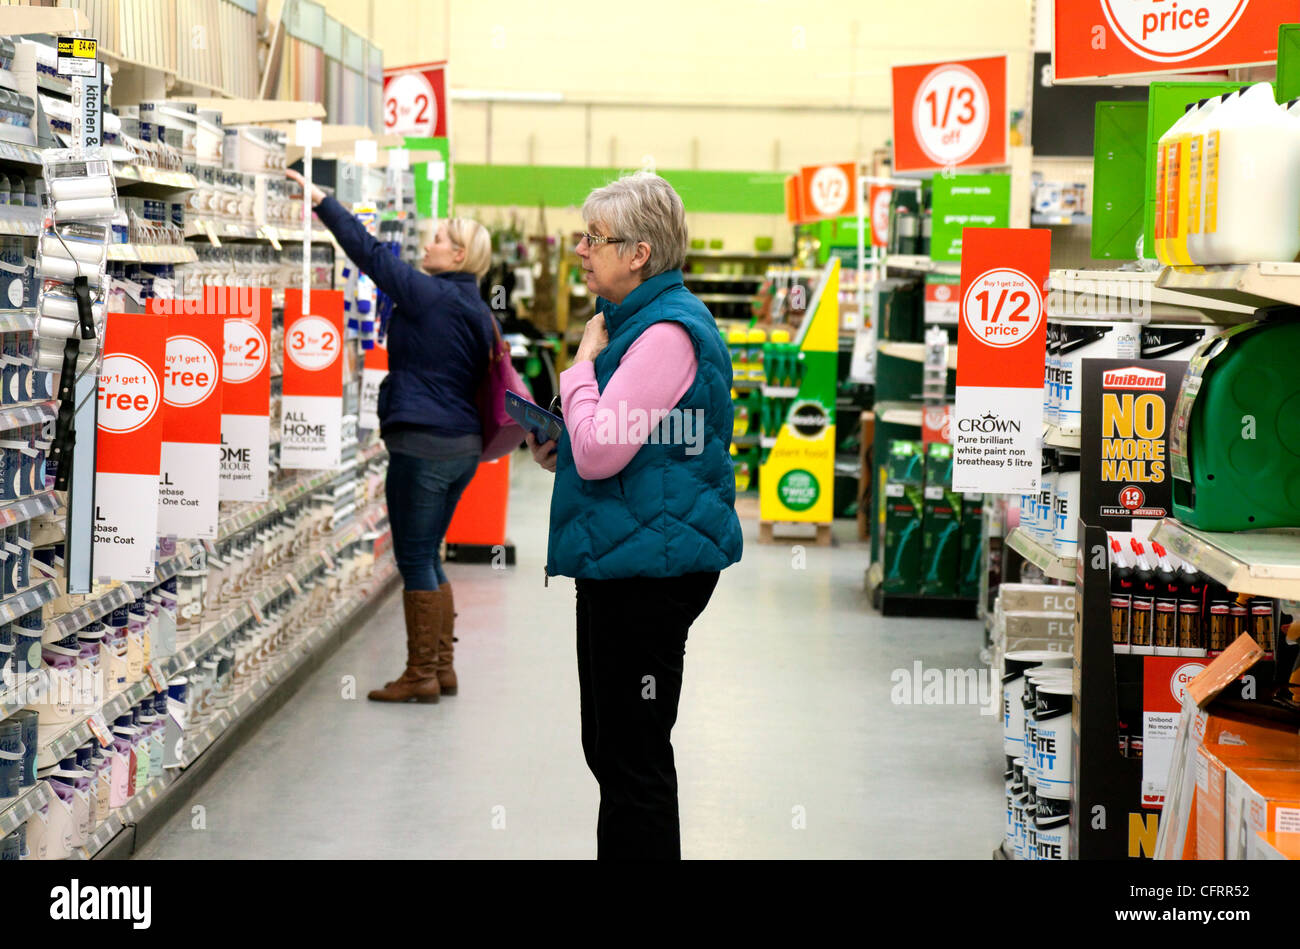 A woman buying discounted reduced price DIY goods in a Homebase store, UK Stock Photo